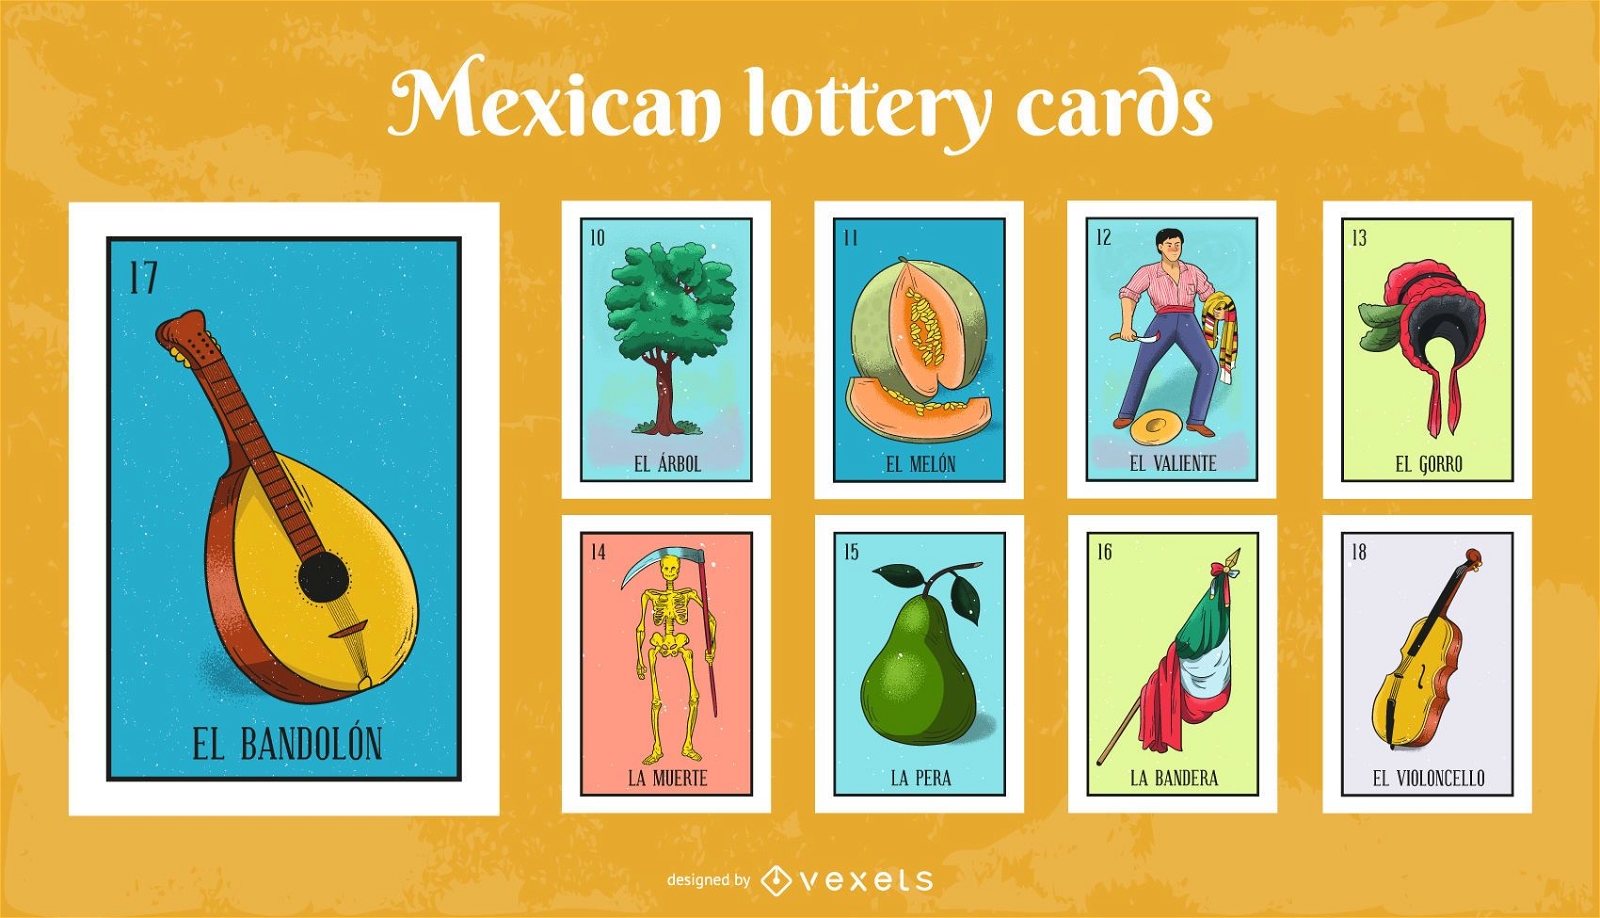 Mexican Lottery Cards Pack #2.